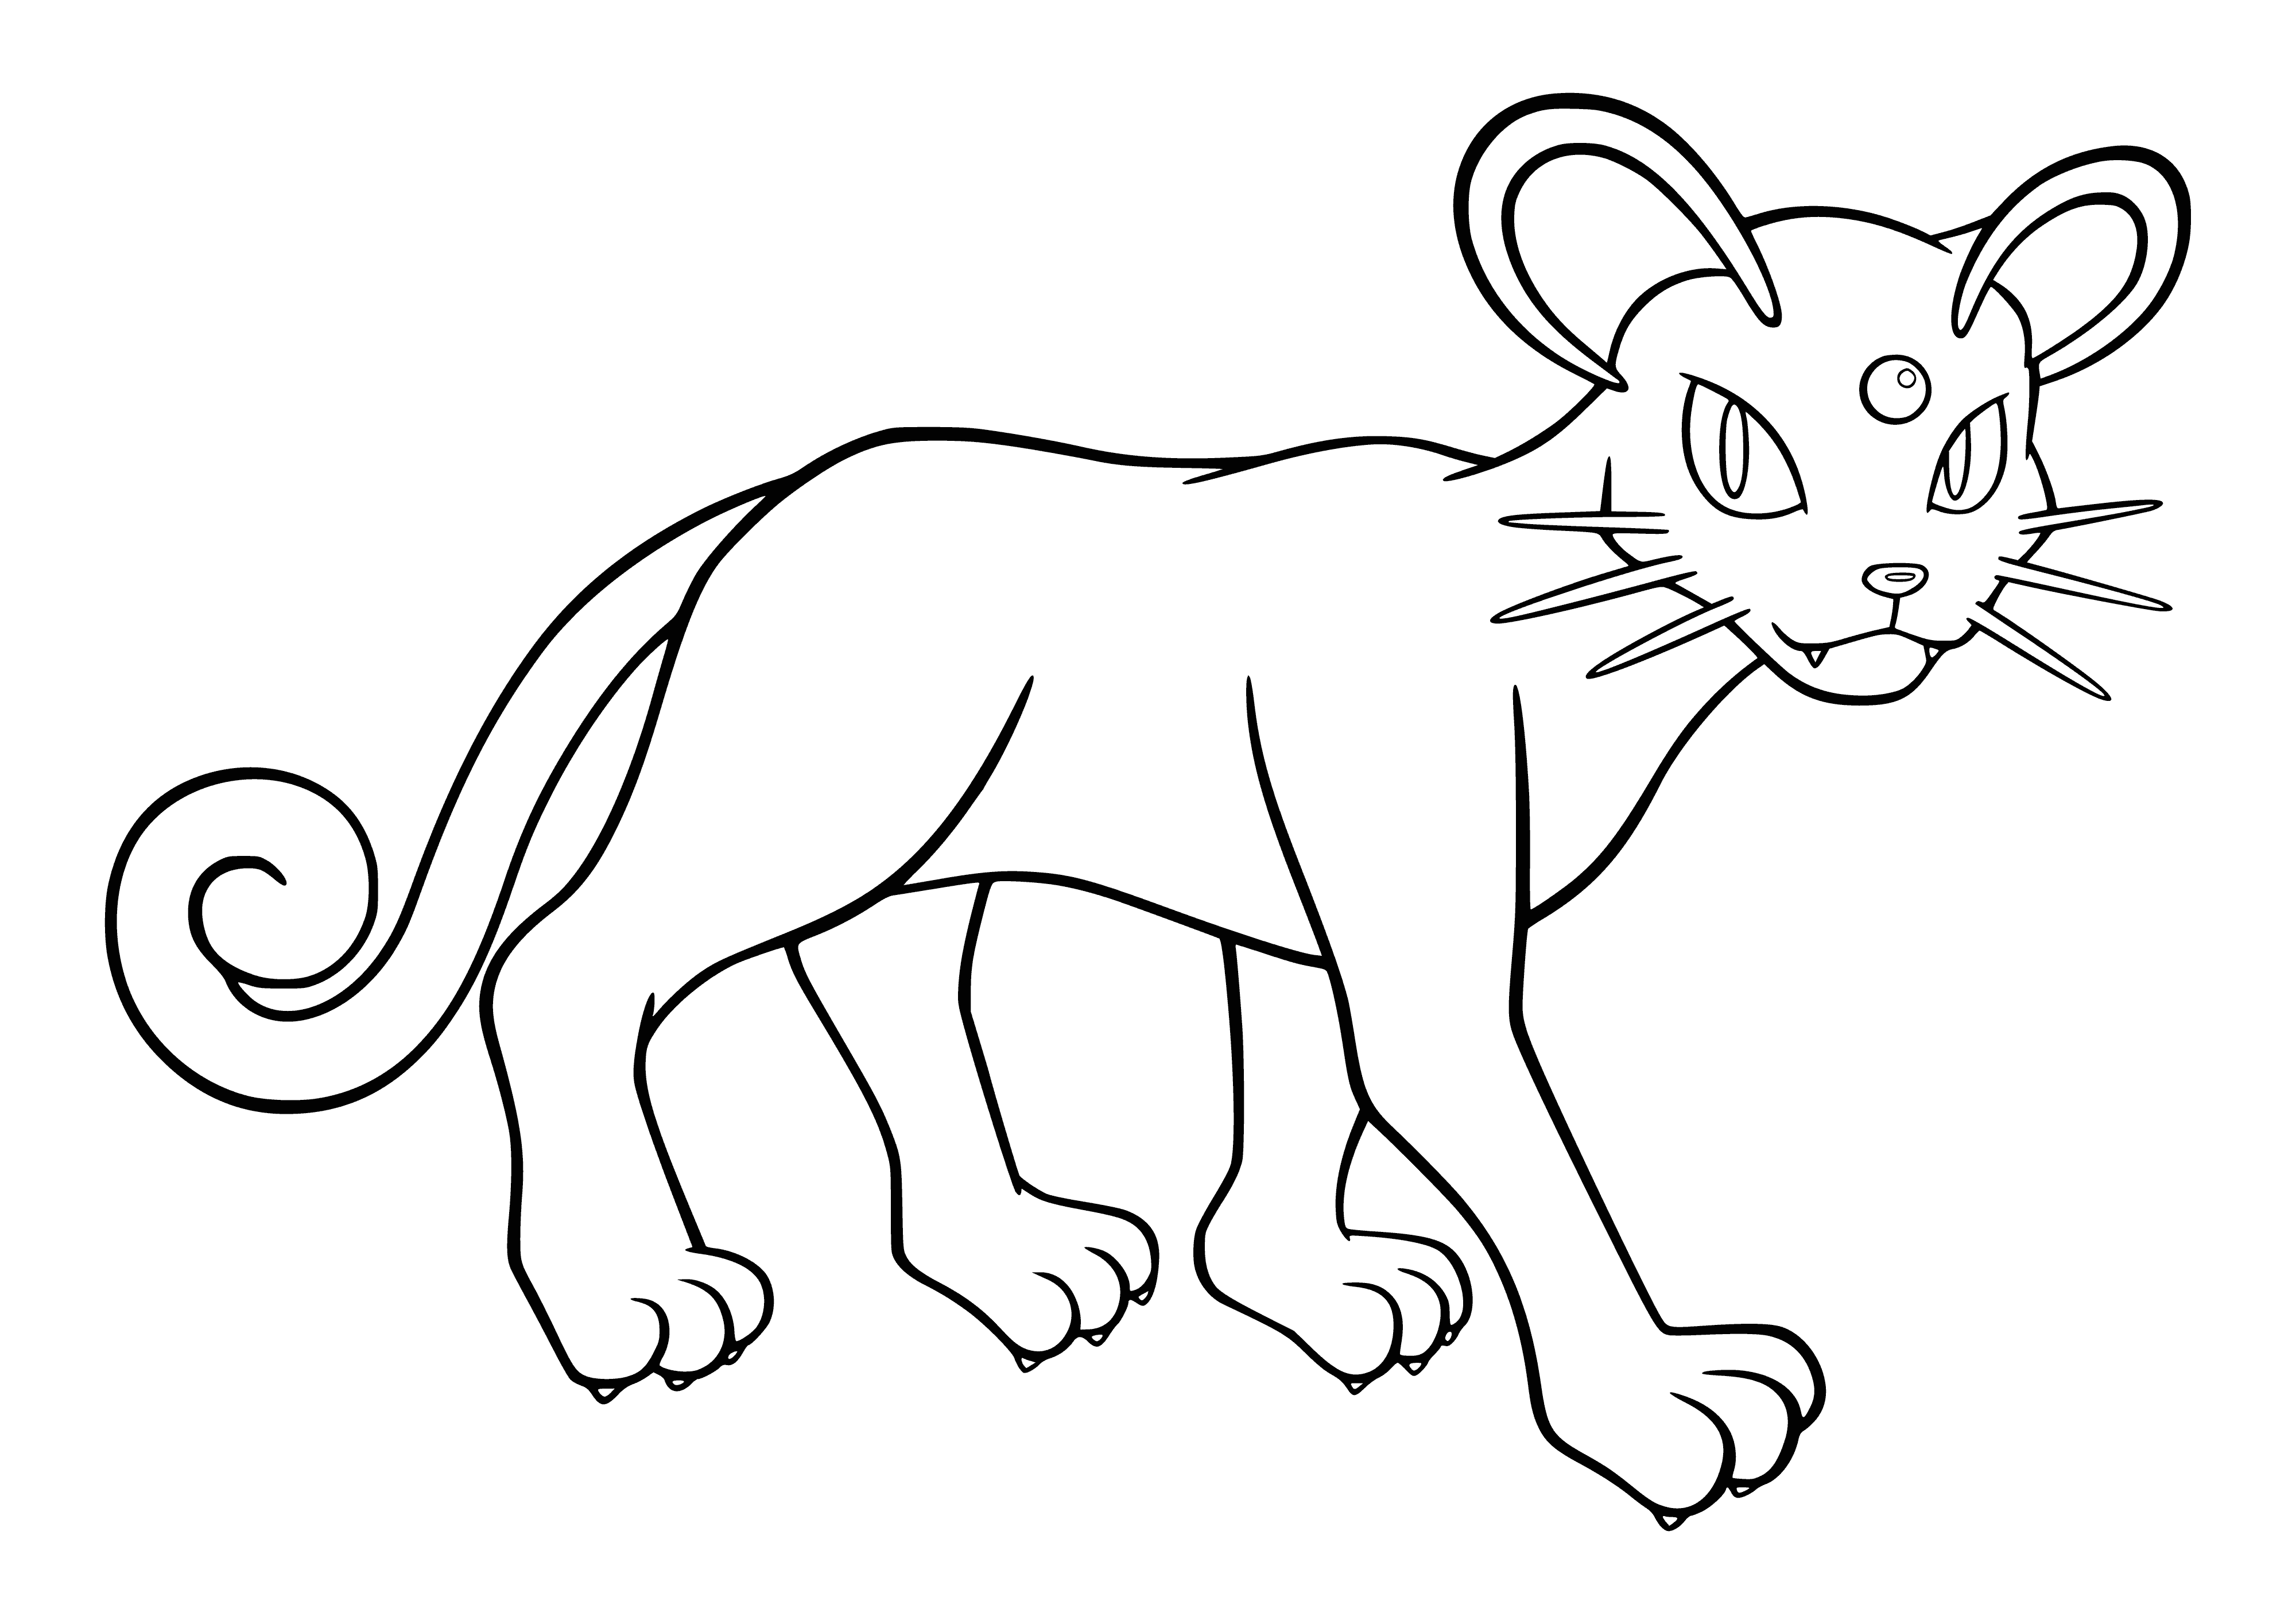 coloring page: Sleek and elegant Persian is a powerful and fast Pokemon, evolving from Meowth with long fur, bushy tail, big eyes, and small ears. Cunning and deceptive.